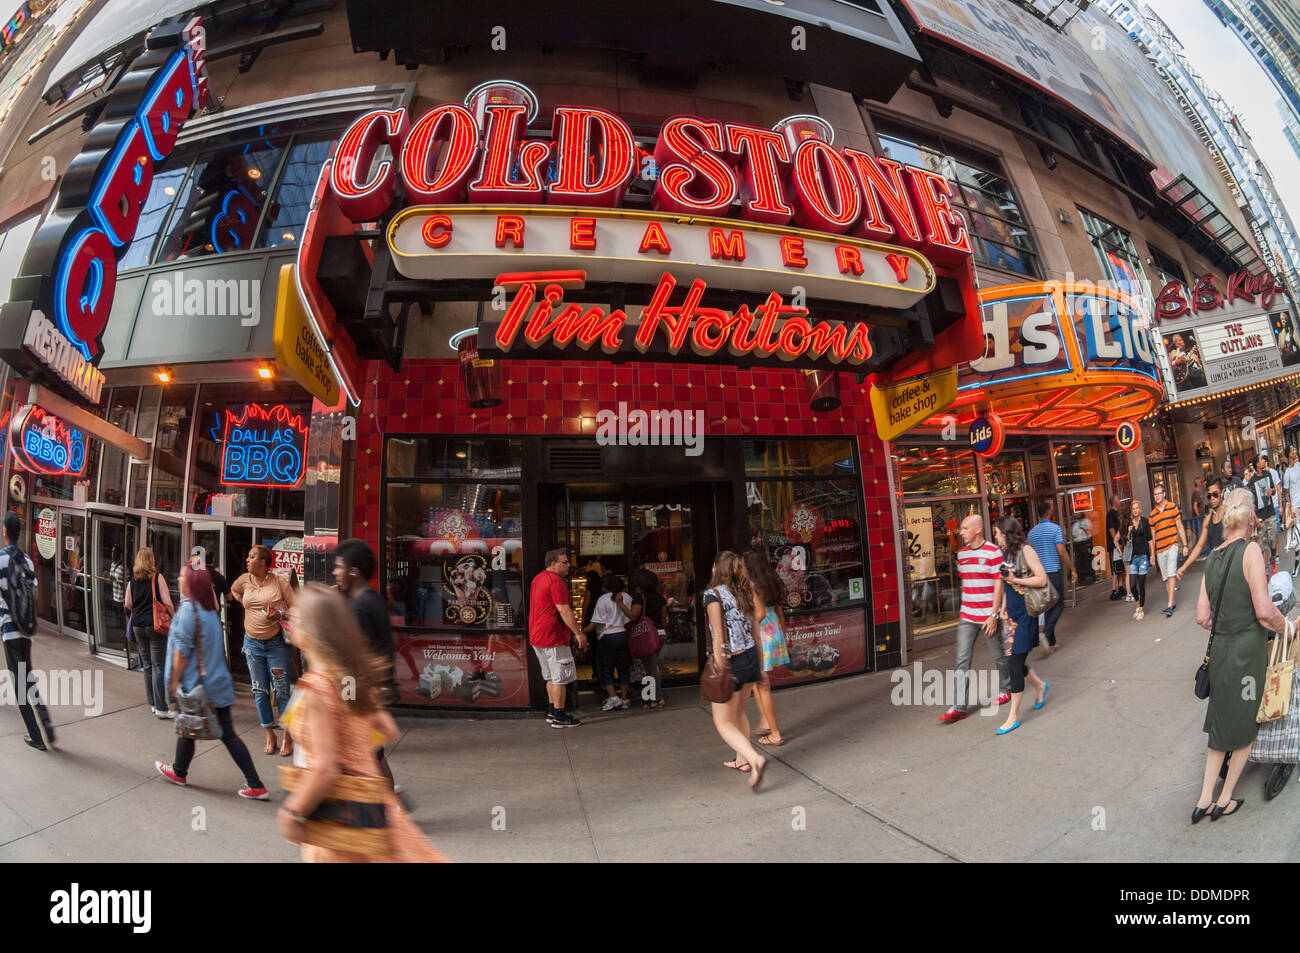 A Cold Stone Creamery store, with a Tim Horton's coffee franchise inside, in Times Square in New York Stock Photo